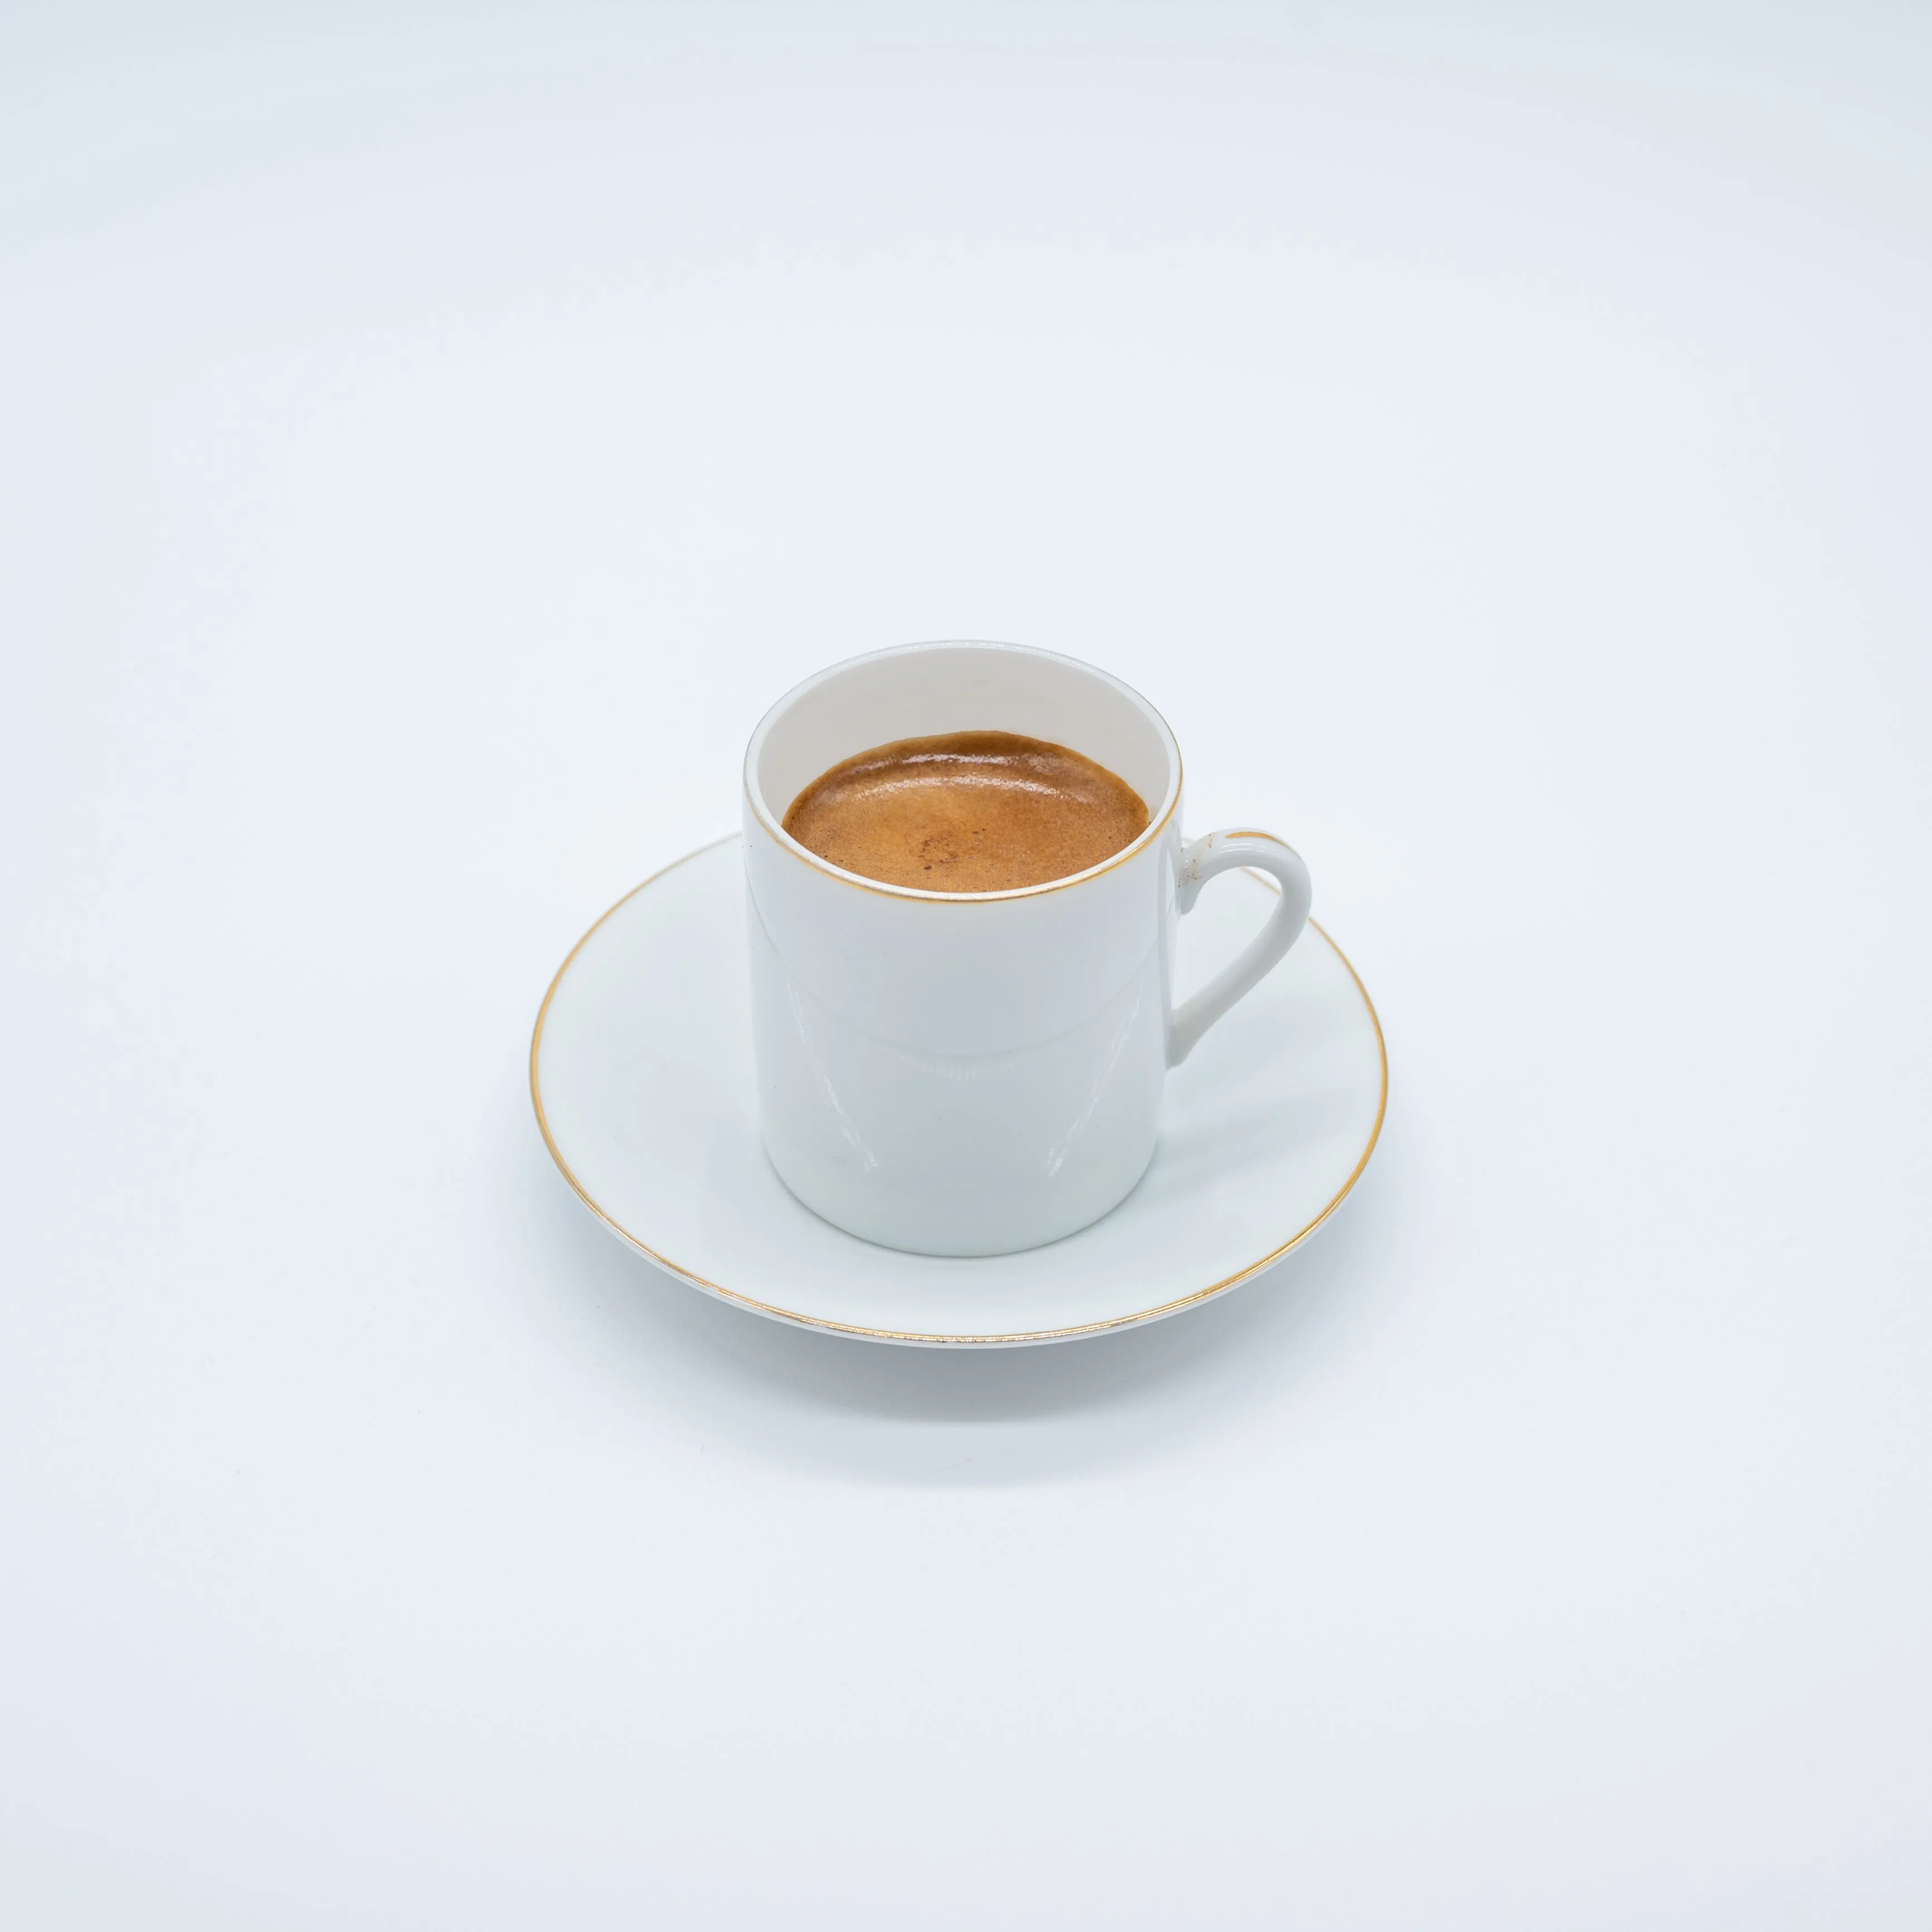 A white cup filled with espresso on a saucer, set against a white background.